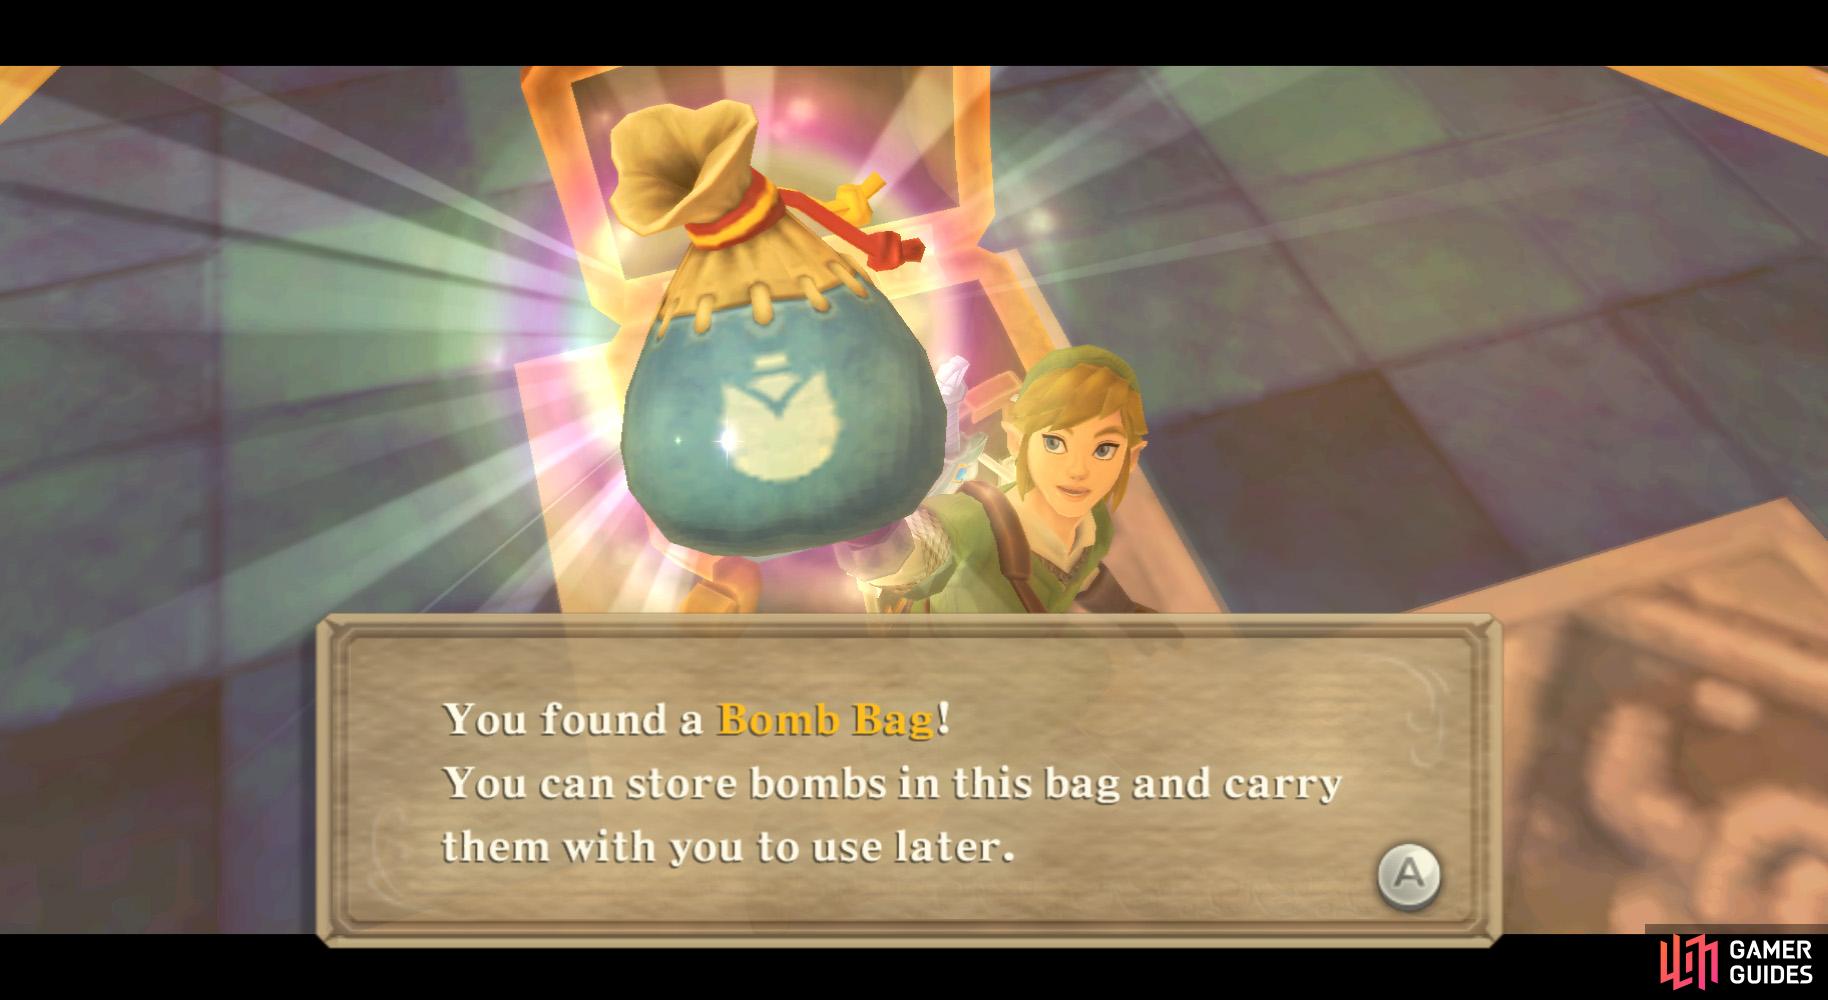 With the Bomb Bag, Link can be more of a Bomberman.